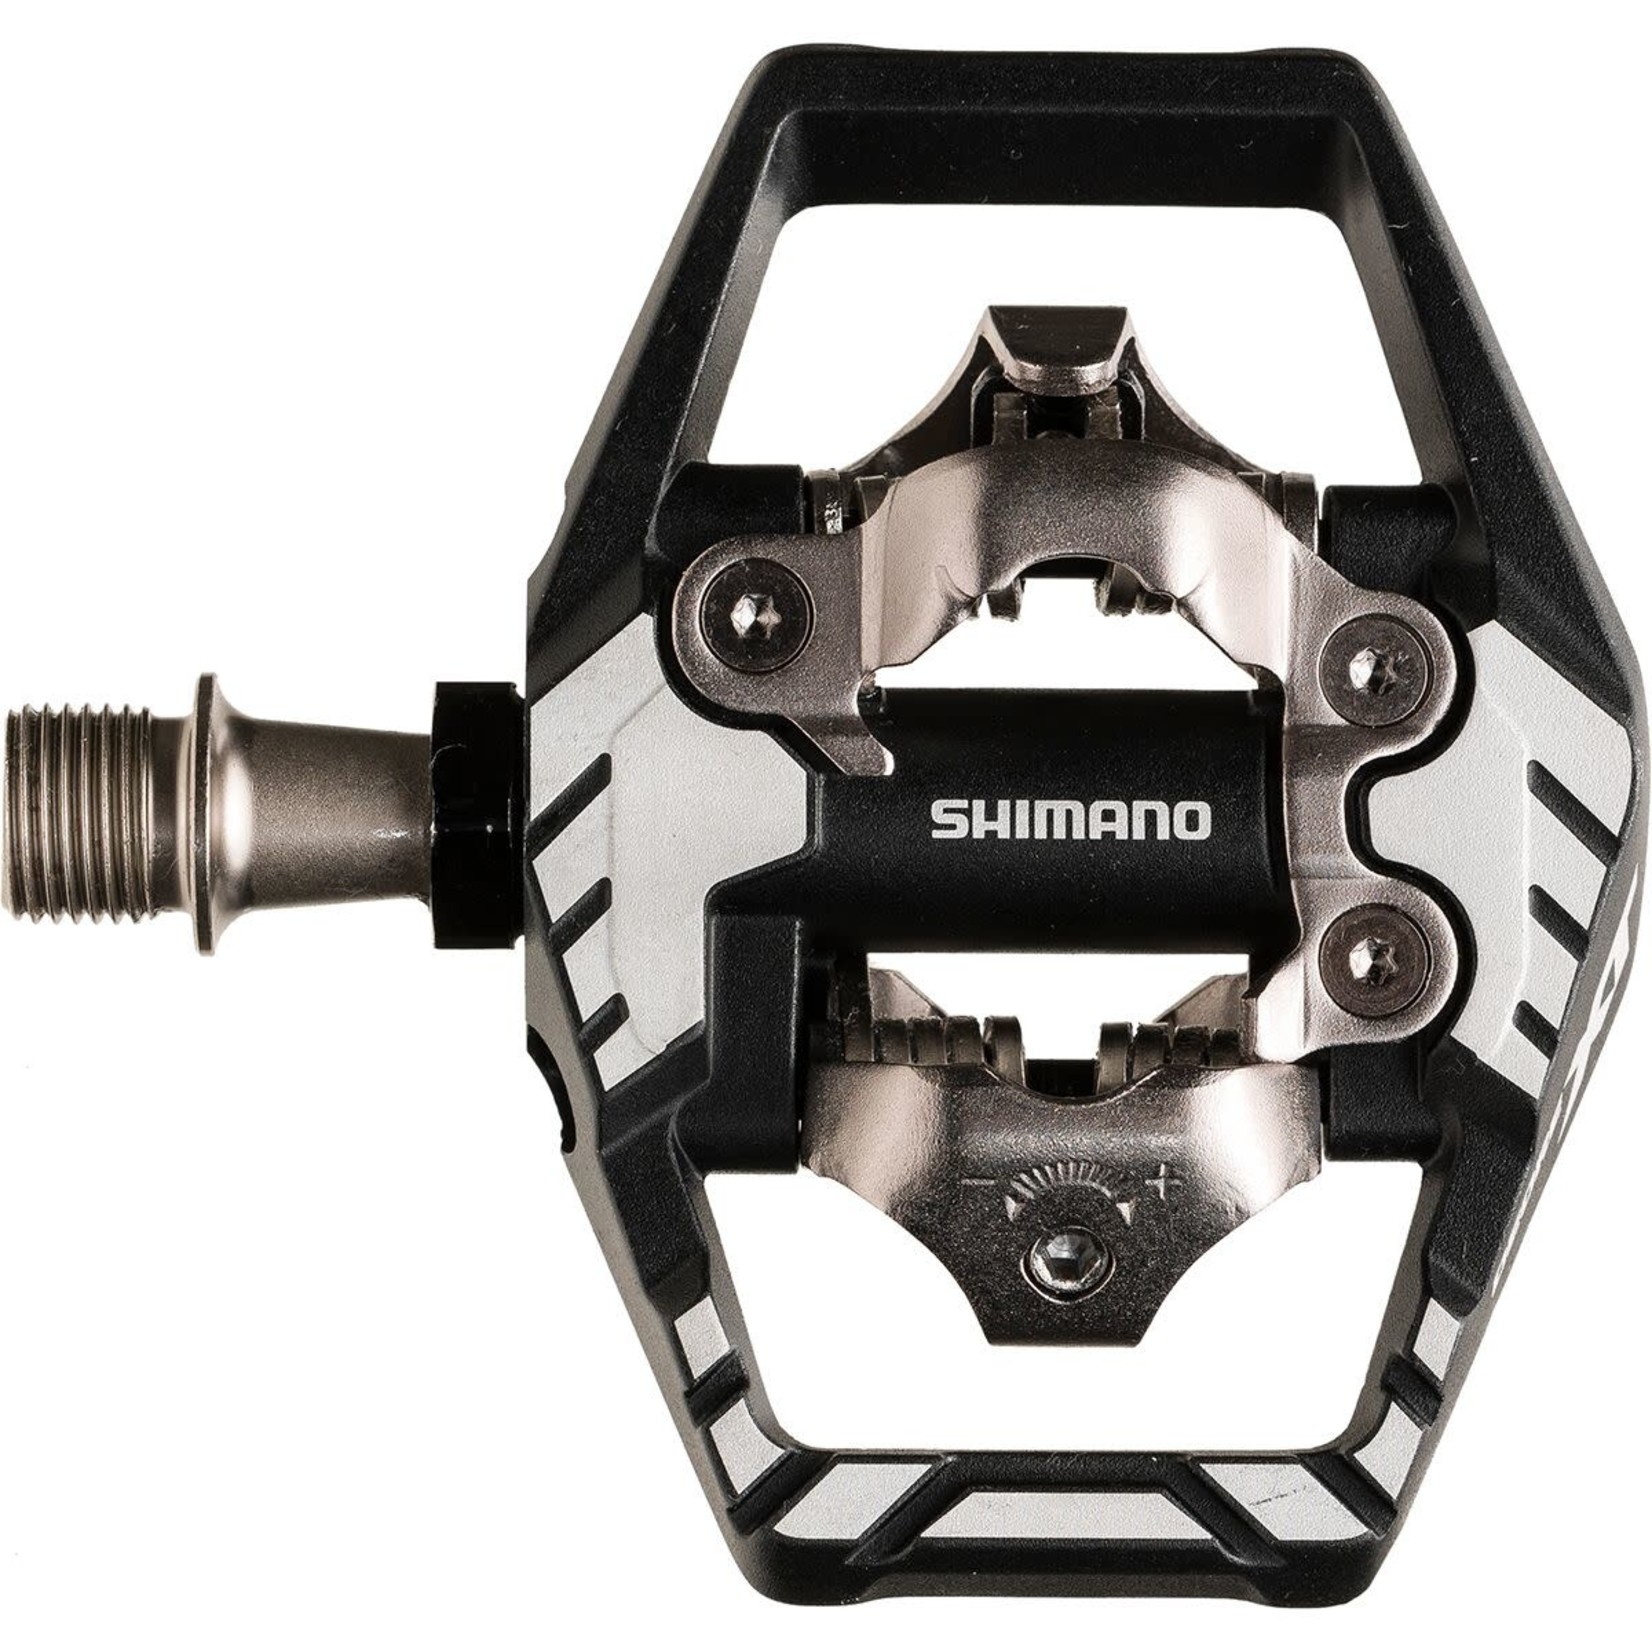 Shimano PEDAL, PD-M8120, DEORE XT, SPD, W/O REFLECTOR, W/CLEAT(SM